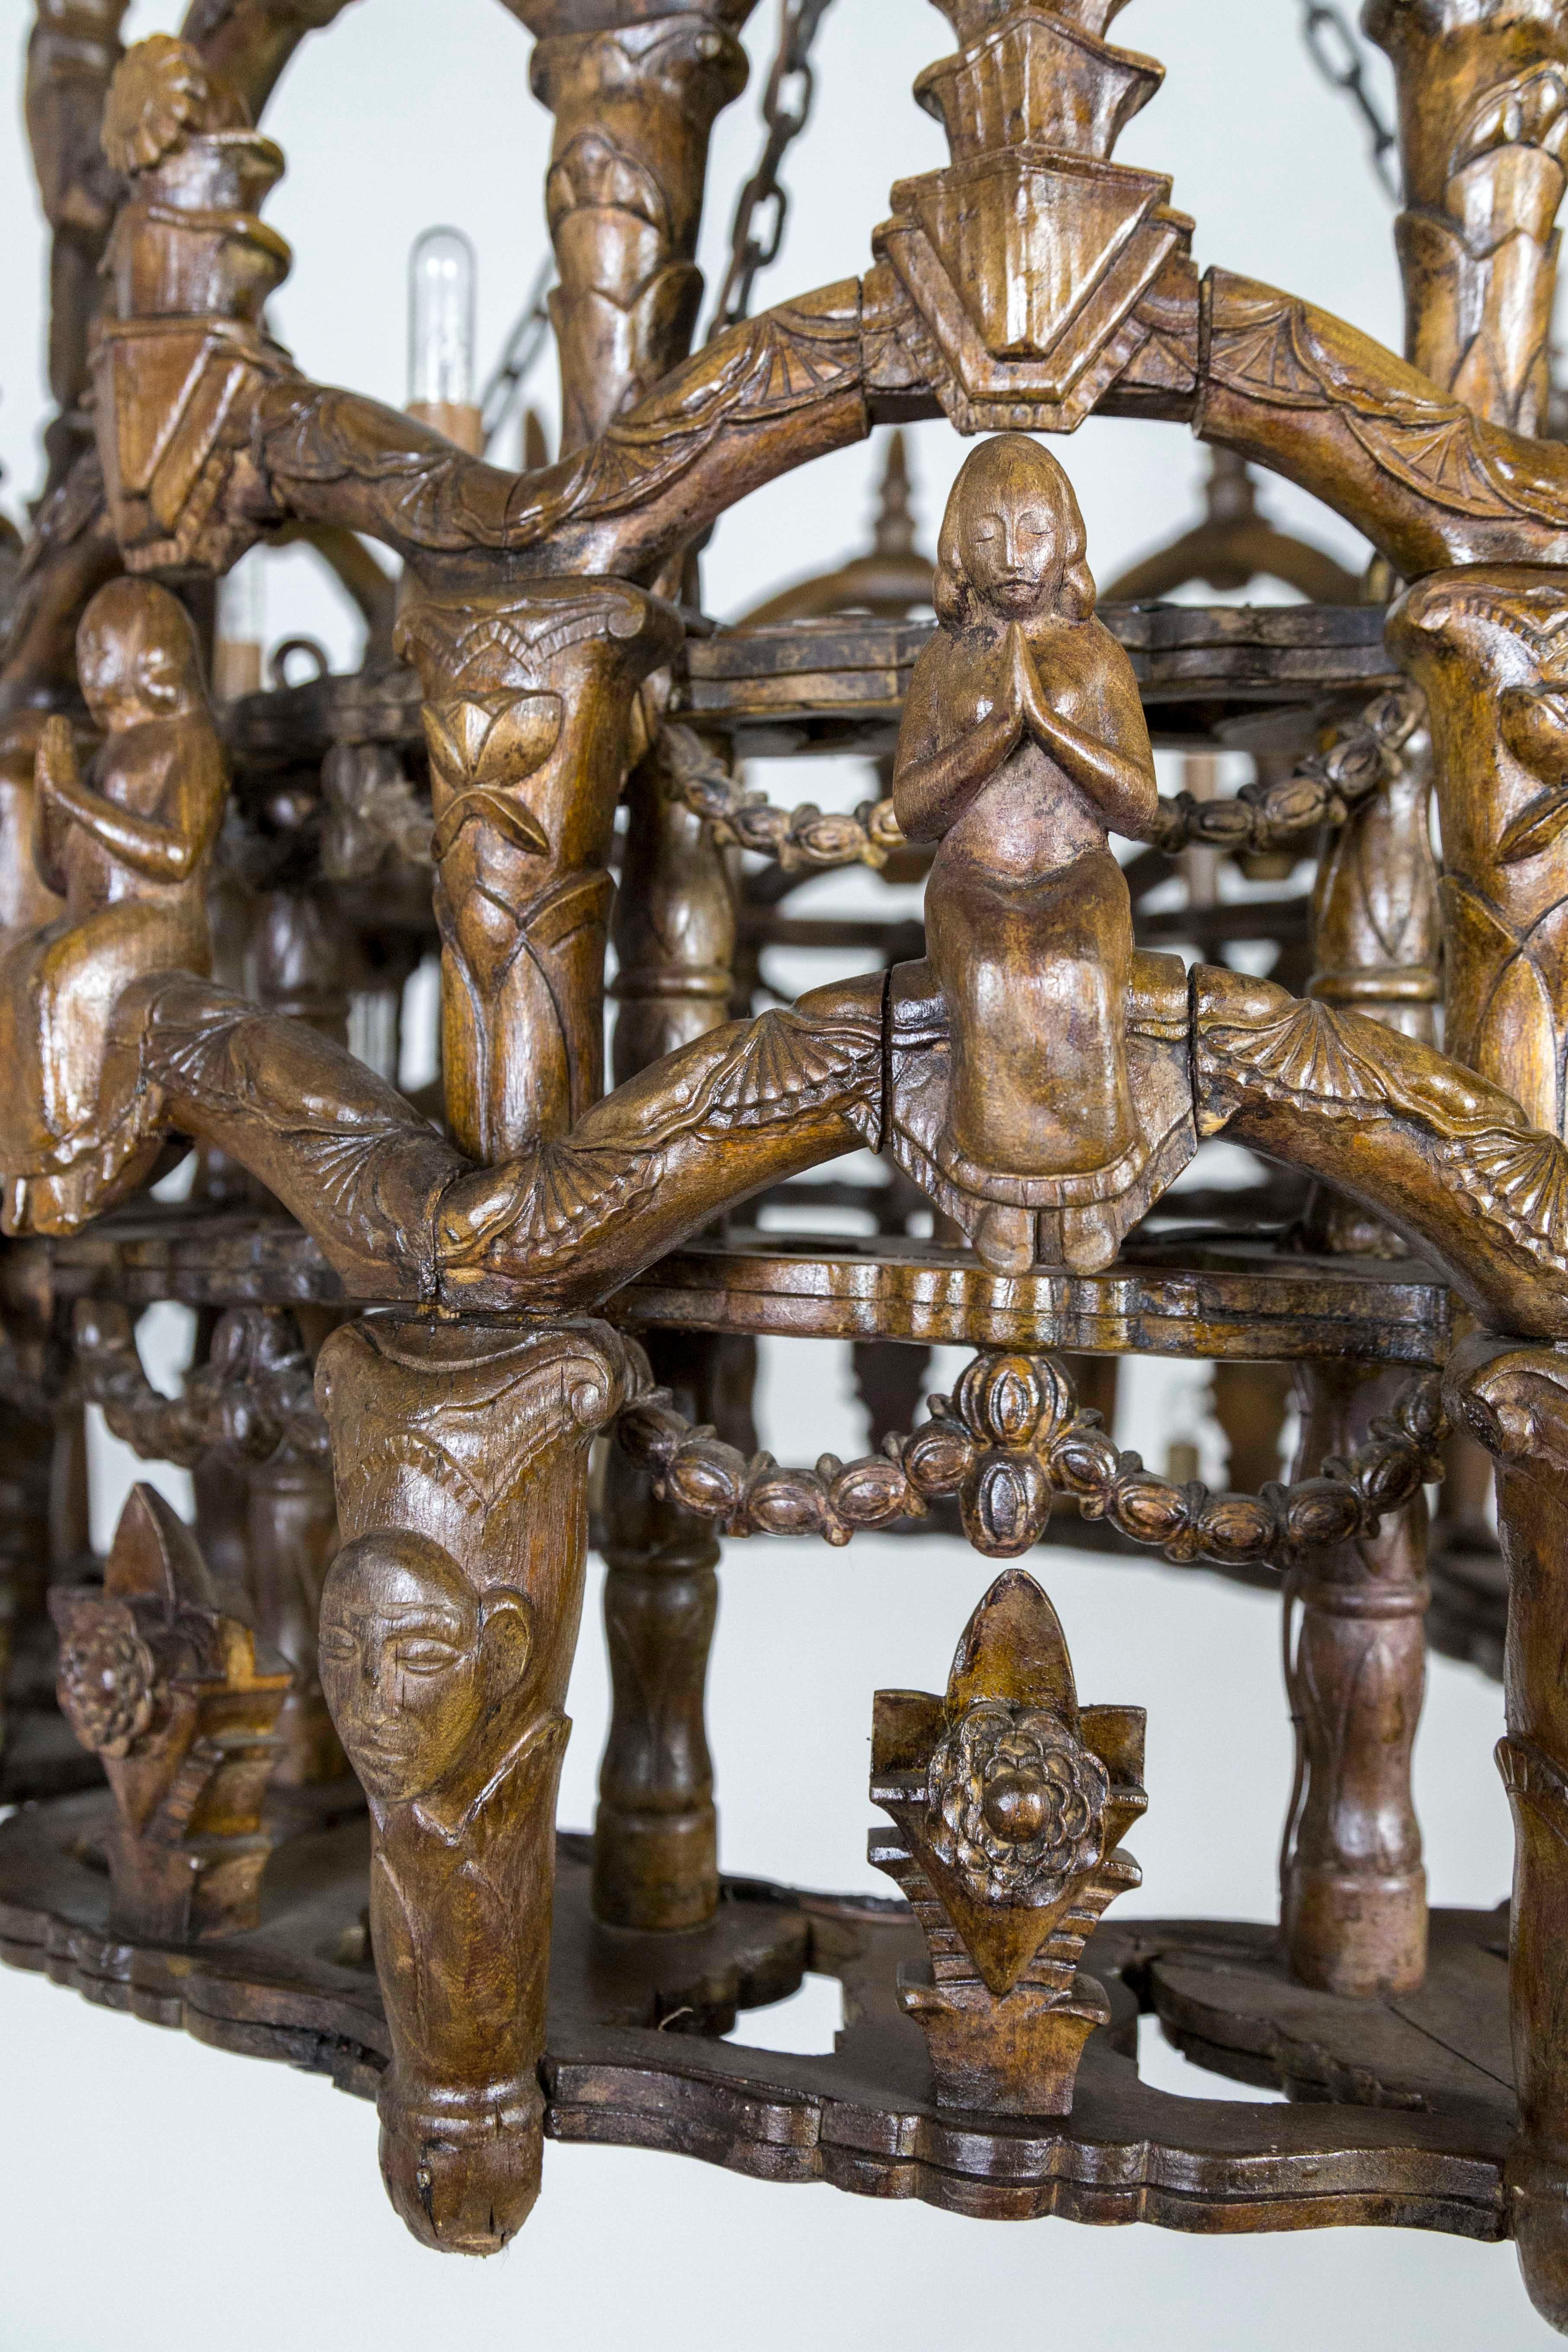 19th Century Carved Wooden S. American Folk Chandelier with Figures and Arches